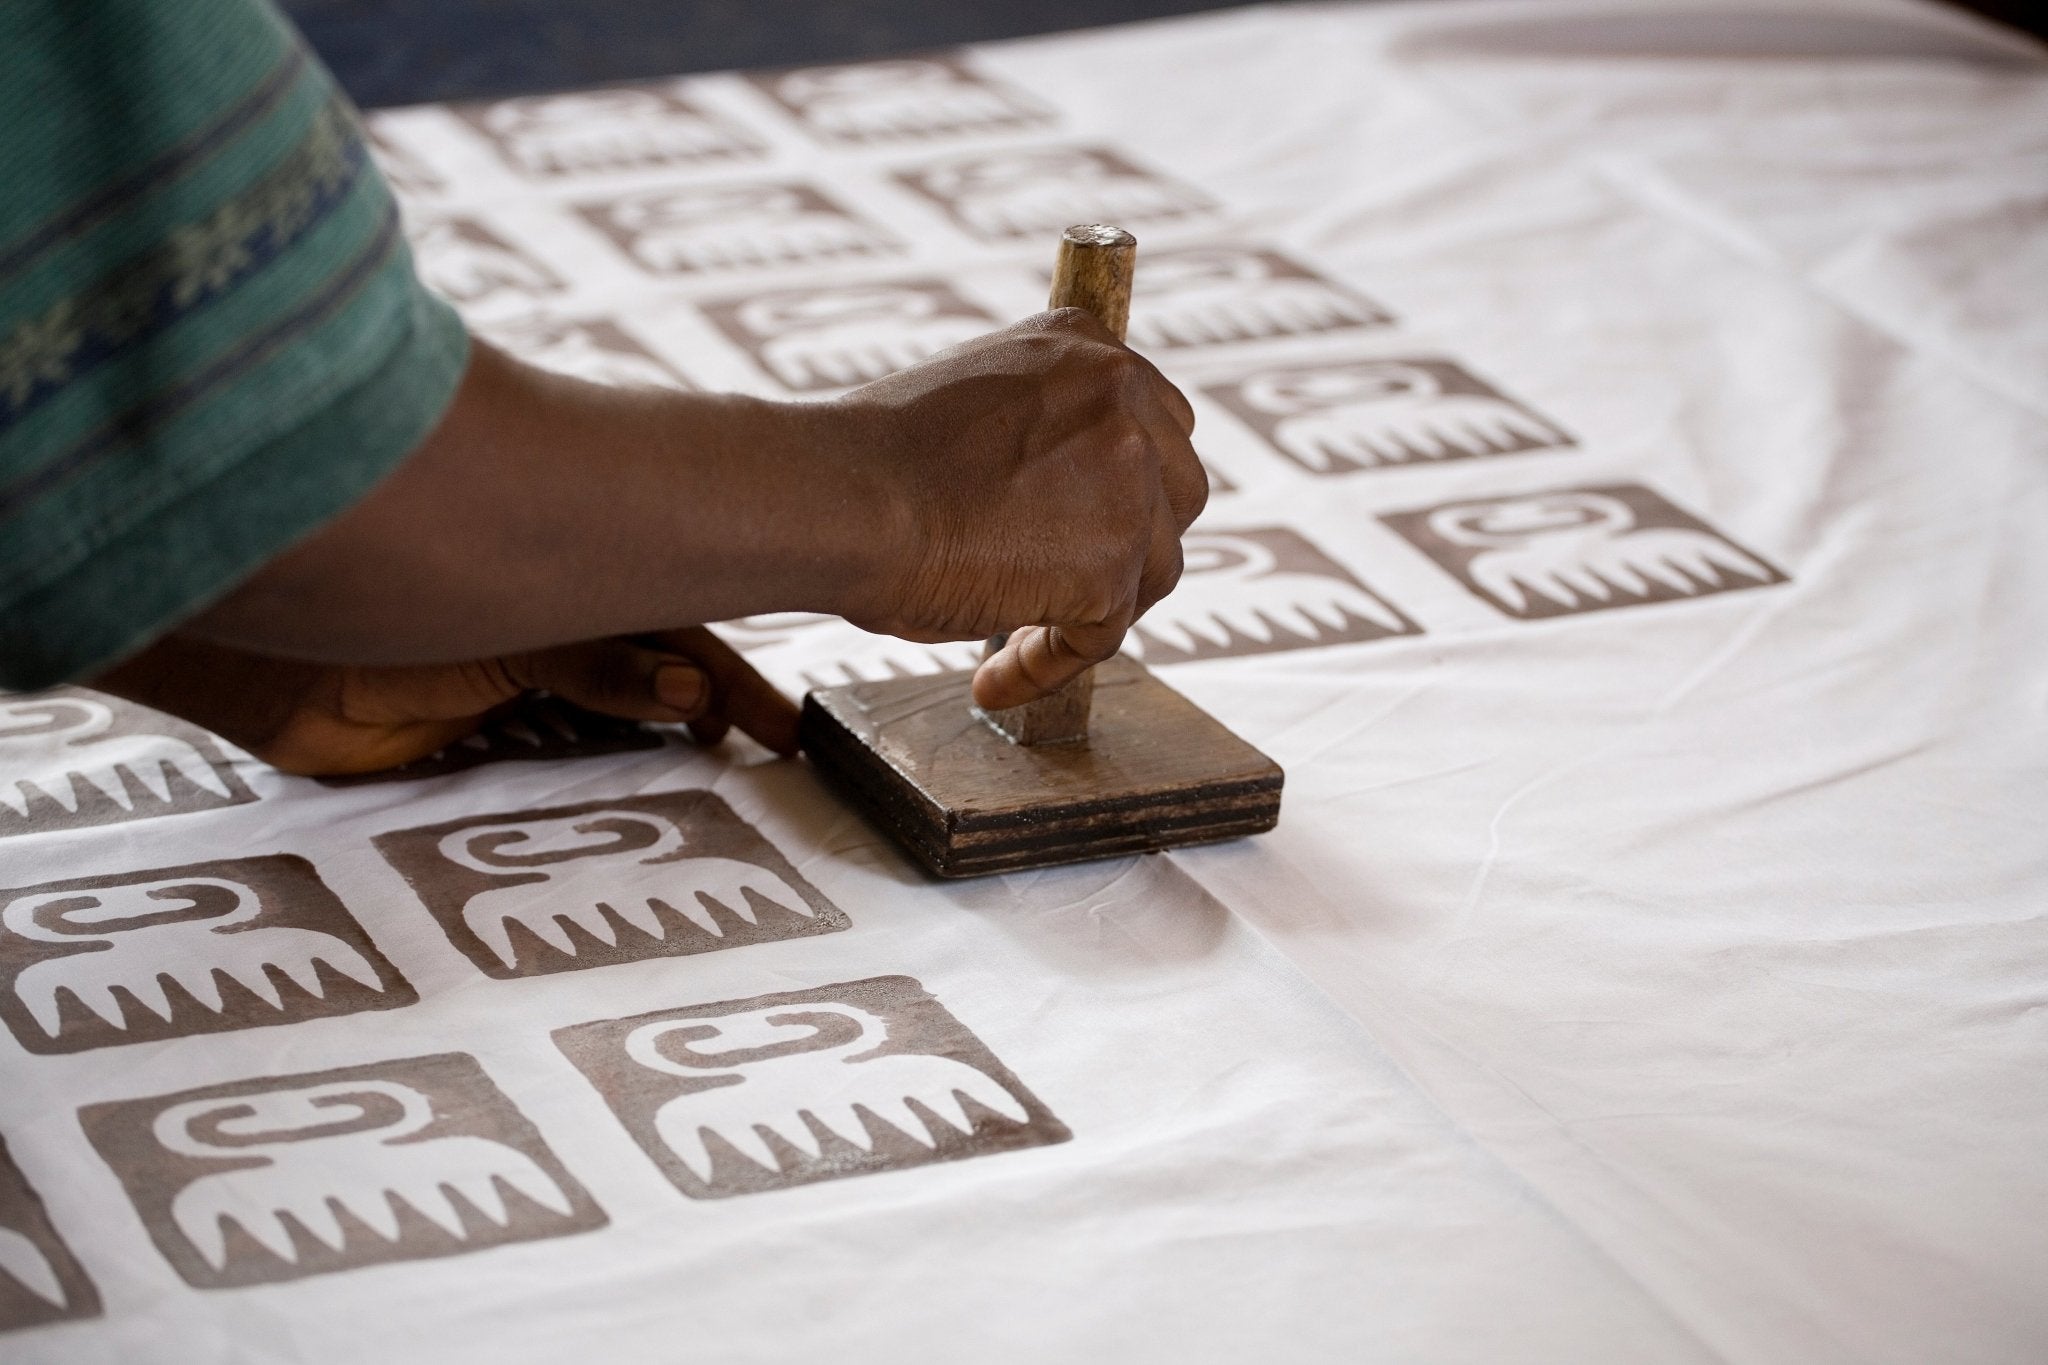 Adinkra: From Earth to Cloth - Abate